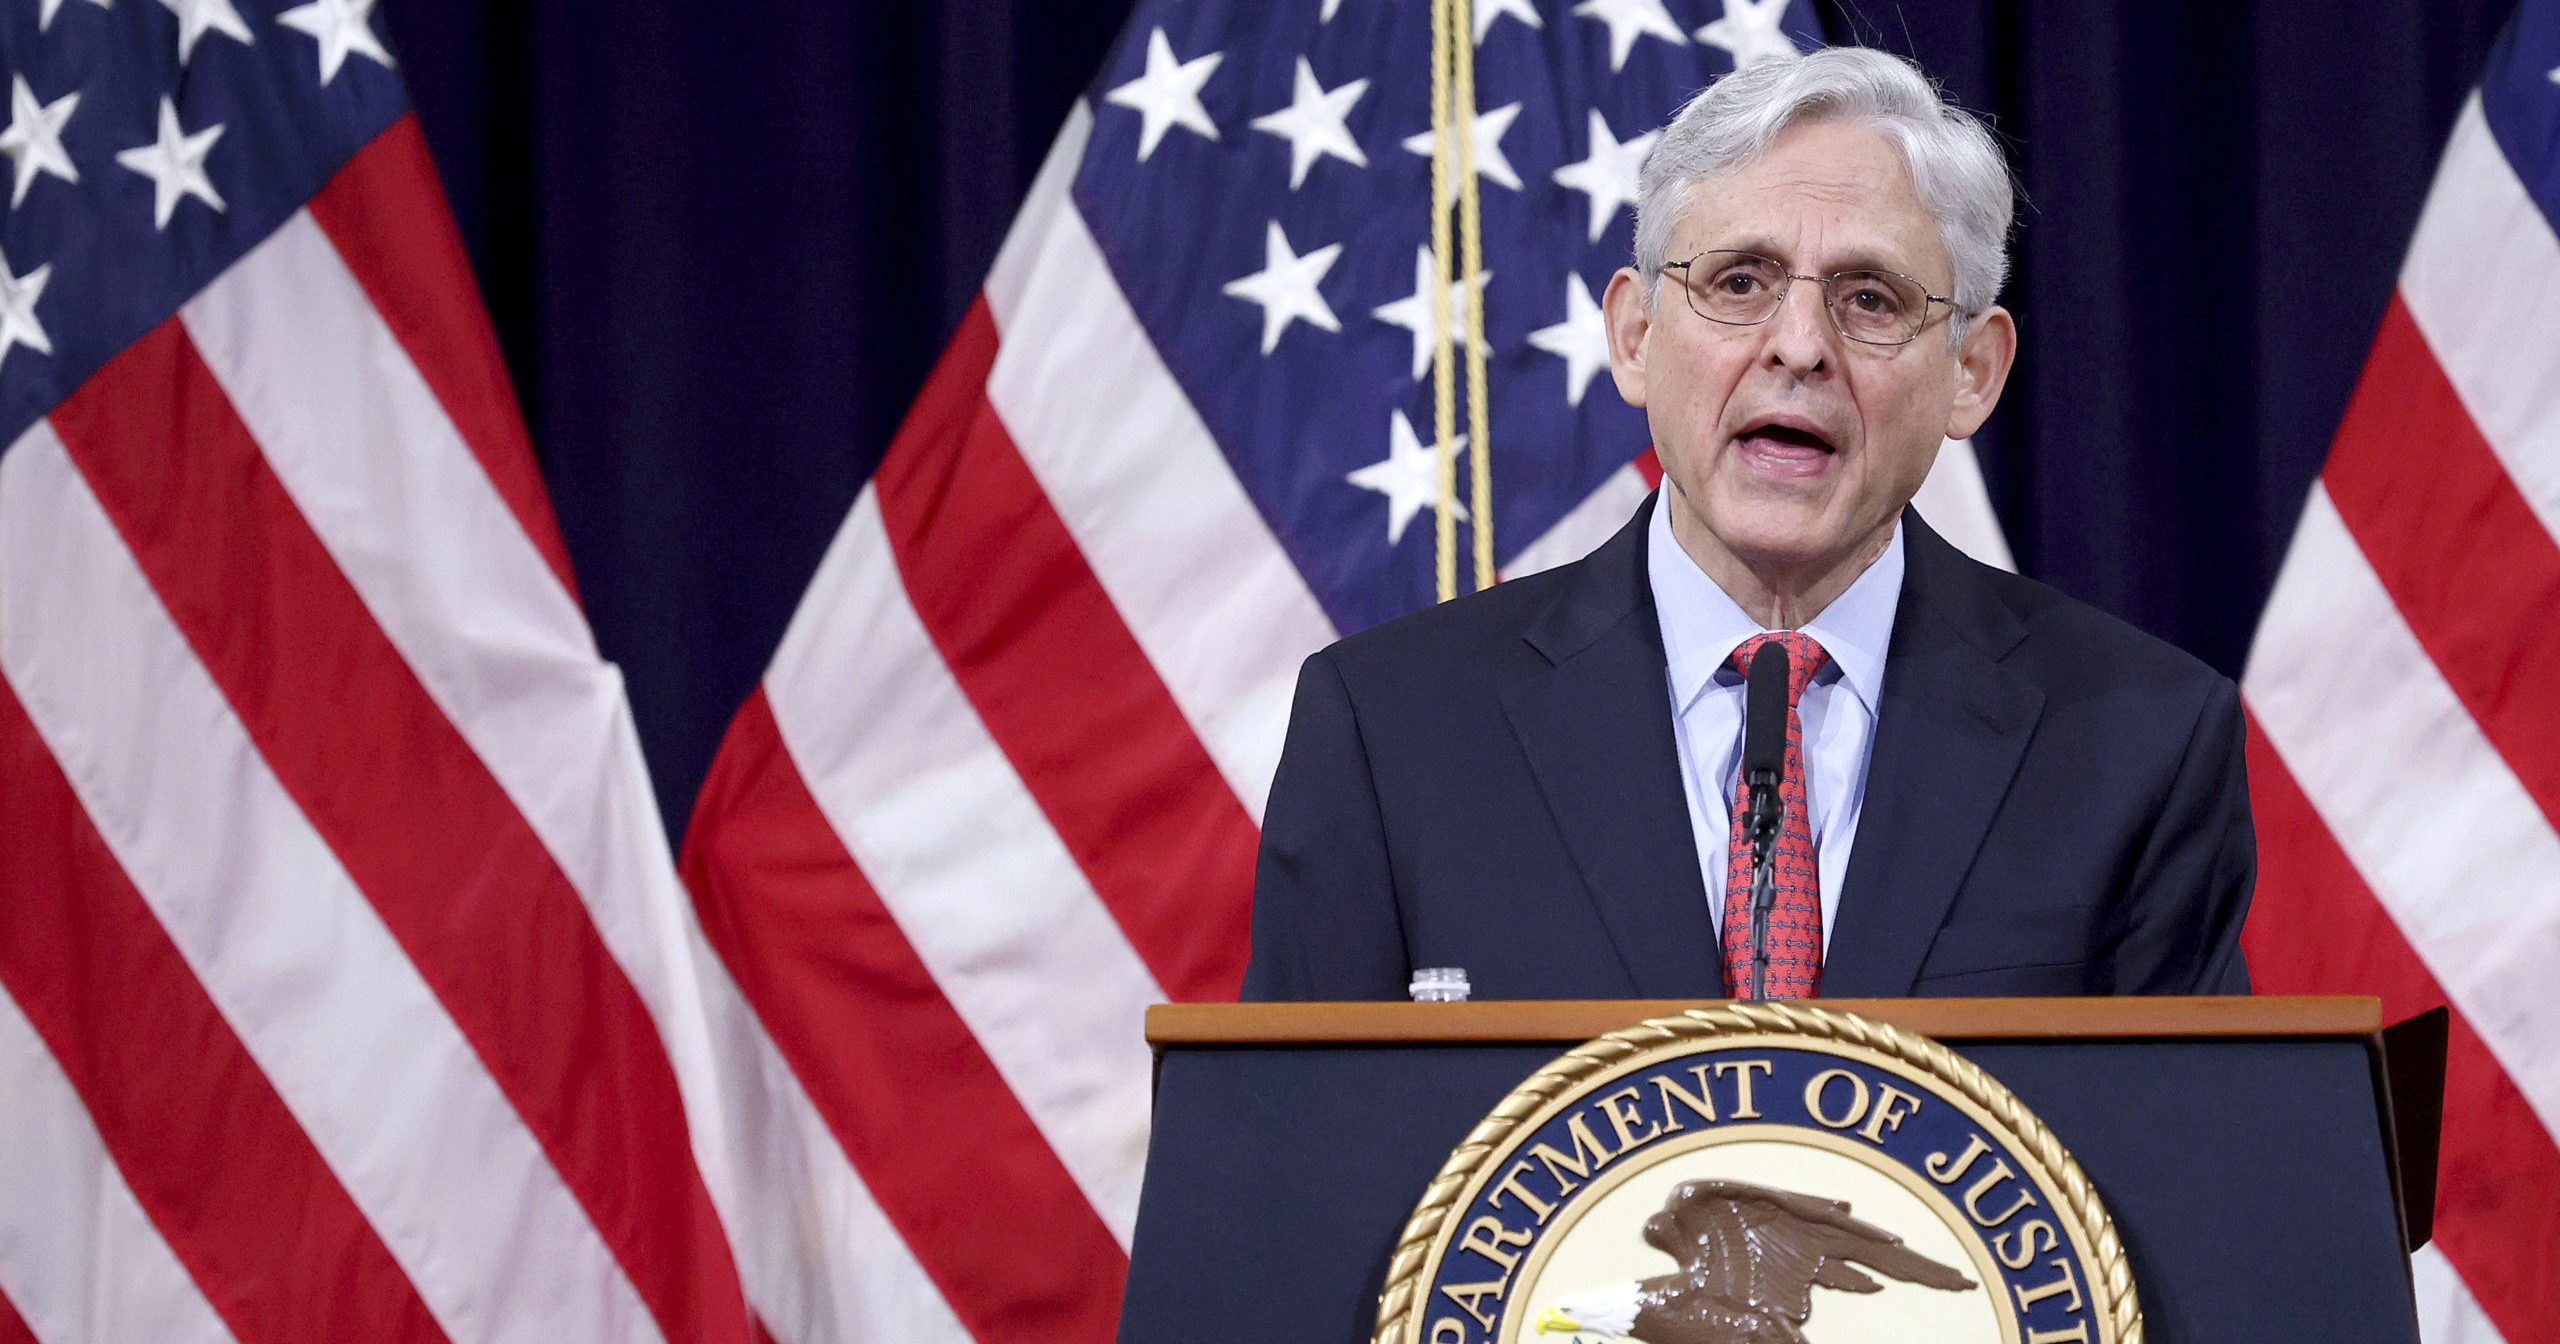 Attorney General Merrick Garland speaks at the Justice Department in Washington, D.C., on June 15, 2021.